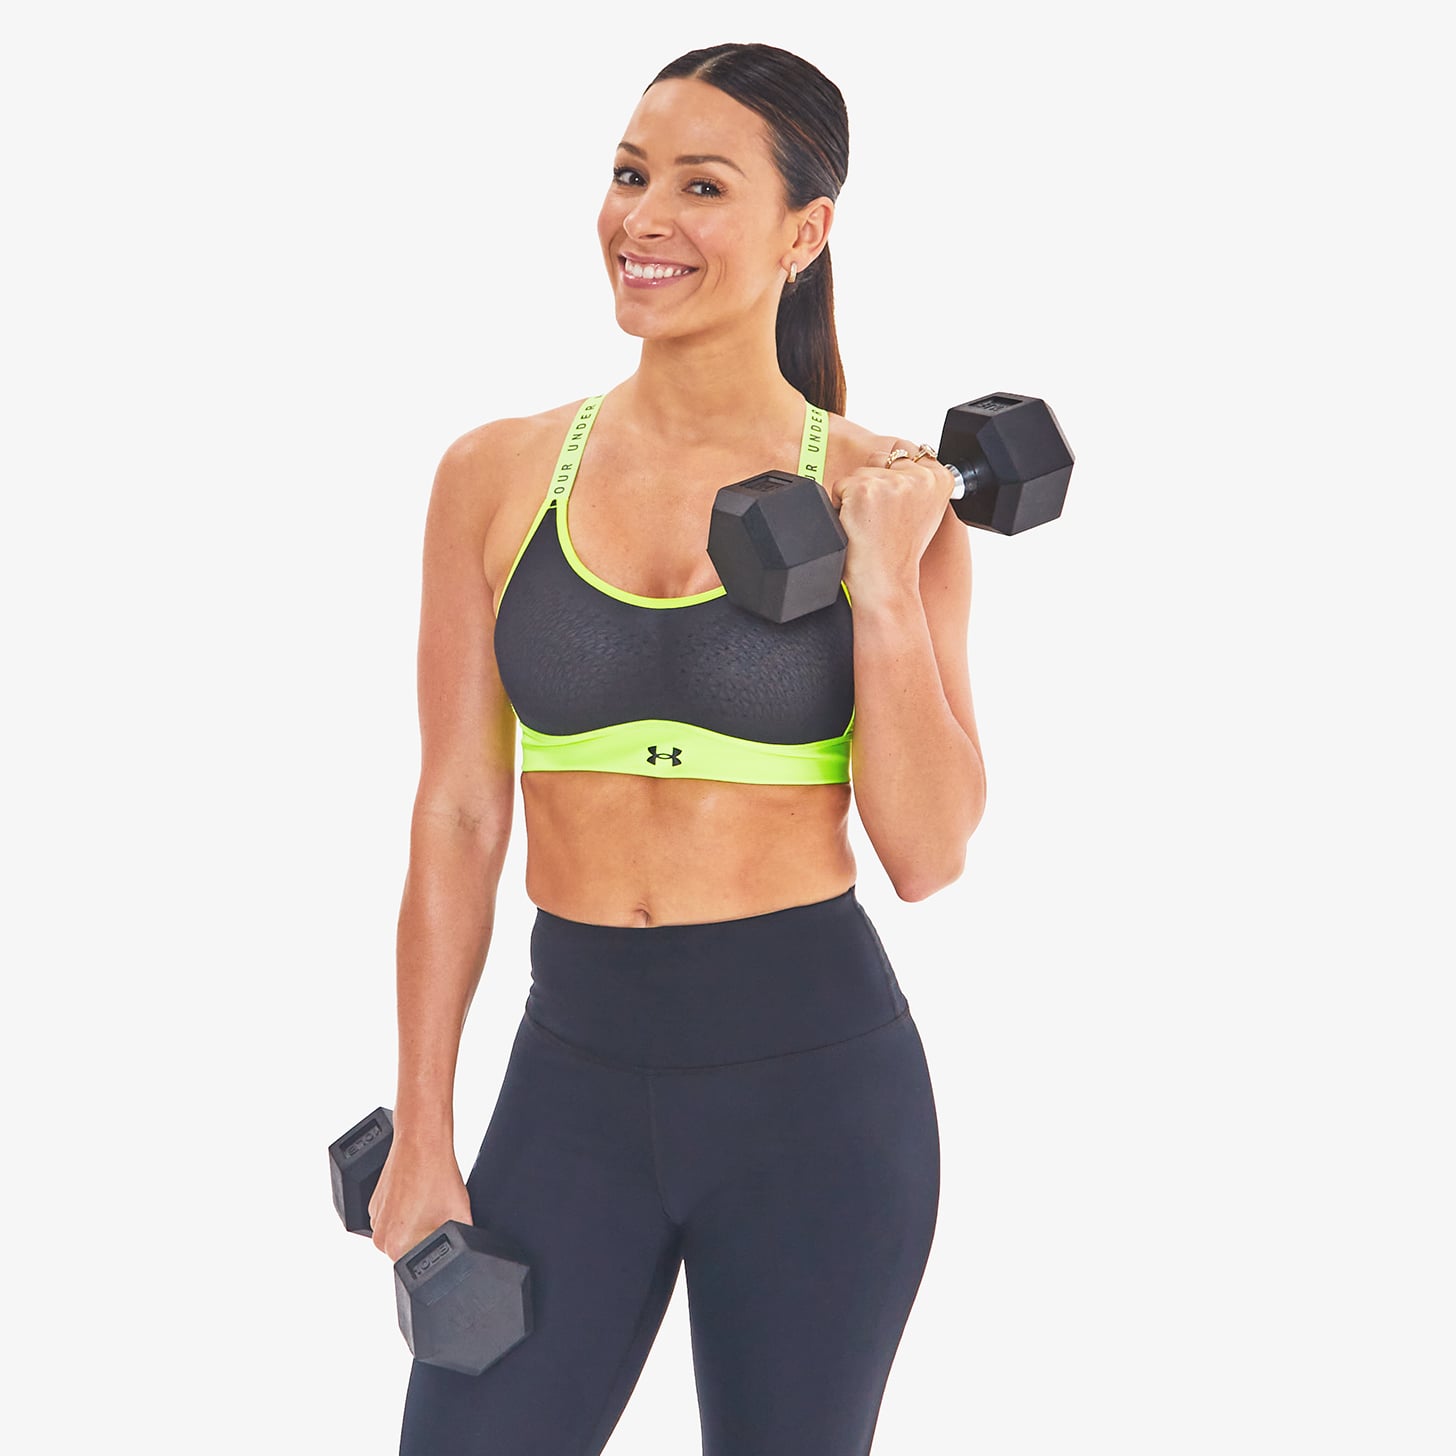 20-Minute Biceps, Triceps, and Back Workout With Dumbbells